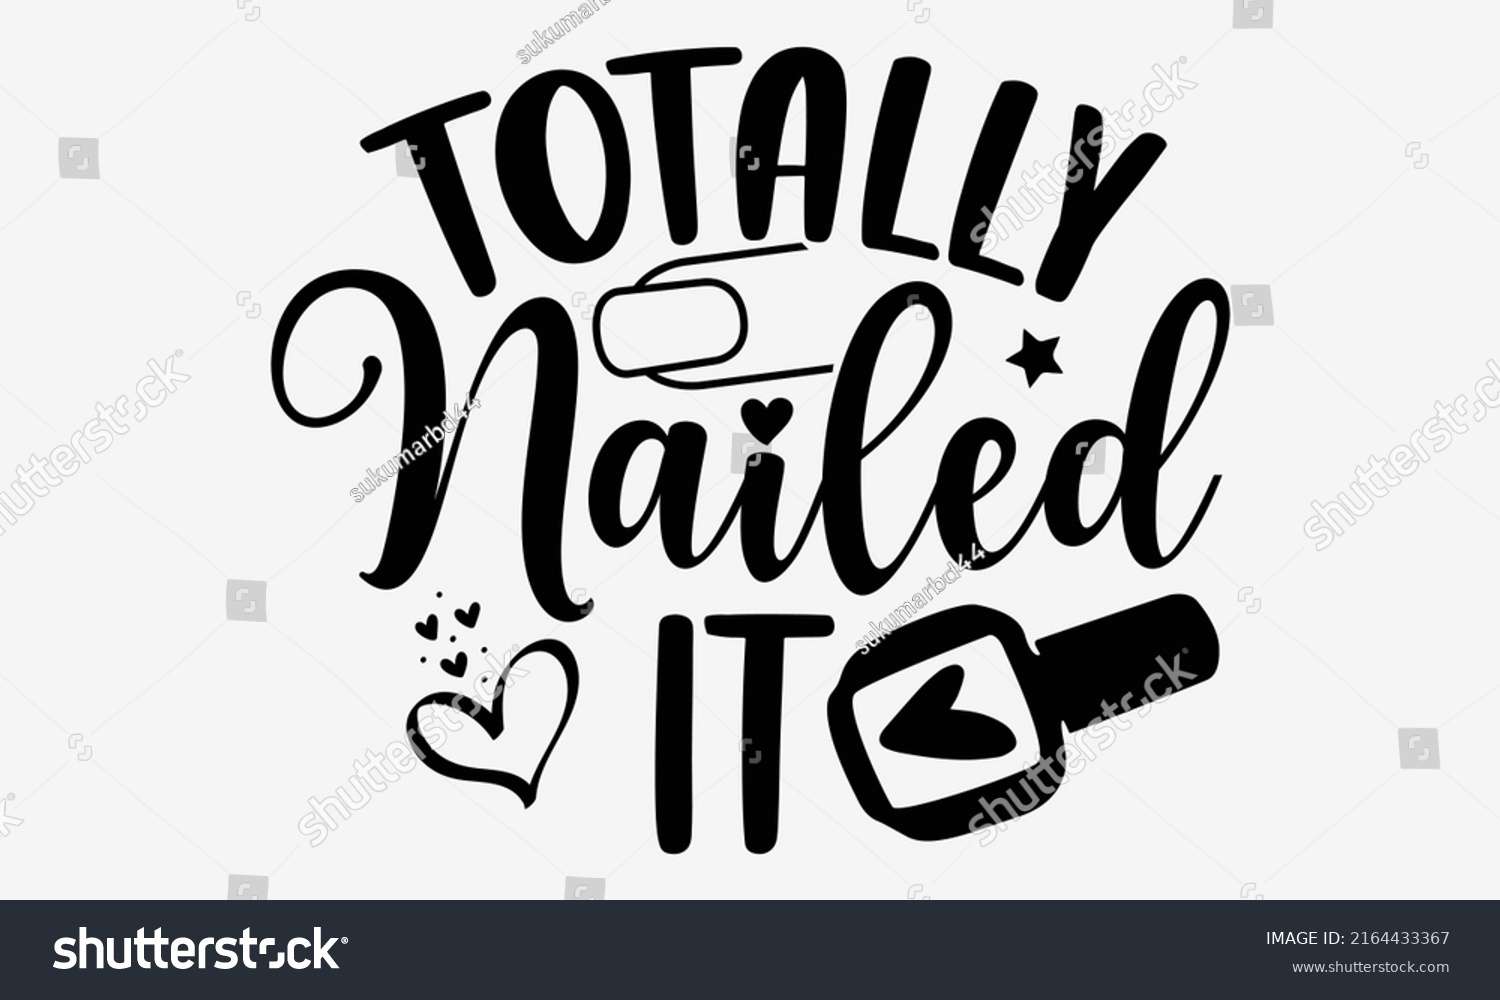 SVG of Totally nailed it - Nail Tech t shirt design, Hand drawn lettering phrase, Calligraphy graphic design, SVG Files for Cutting Cricut and Silhouette svg